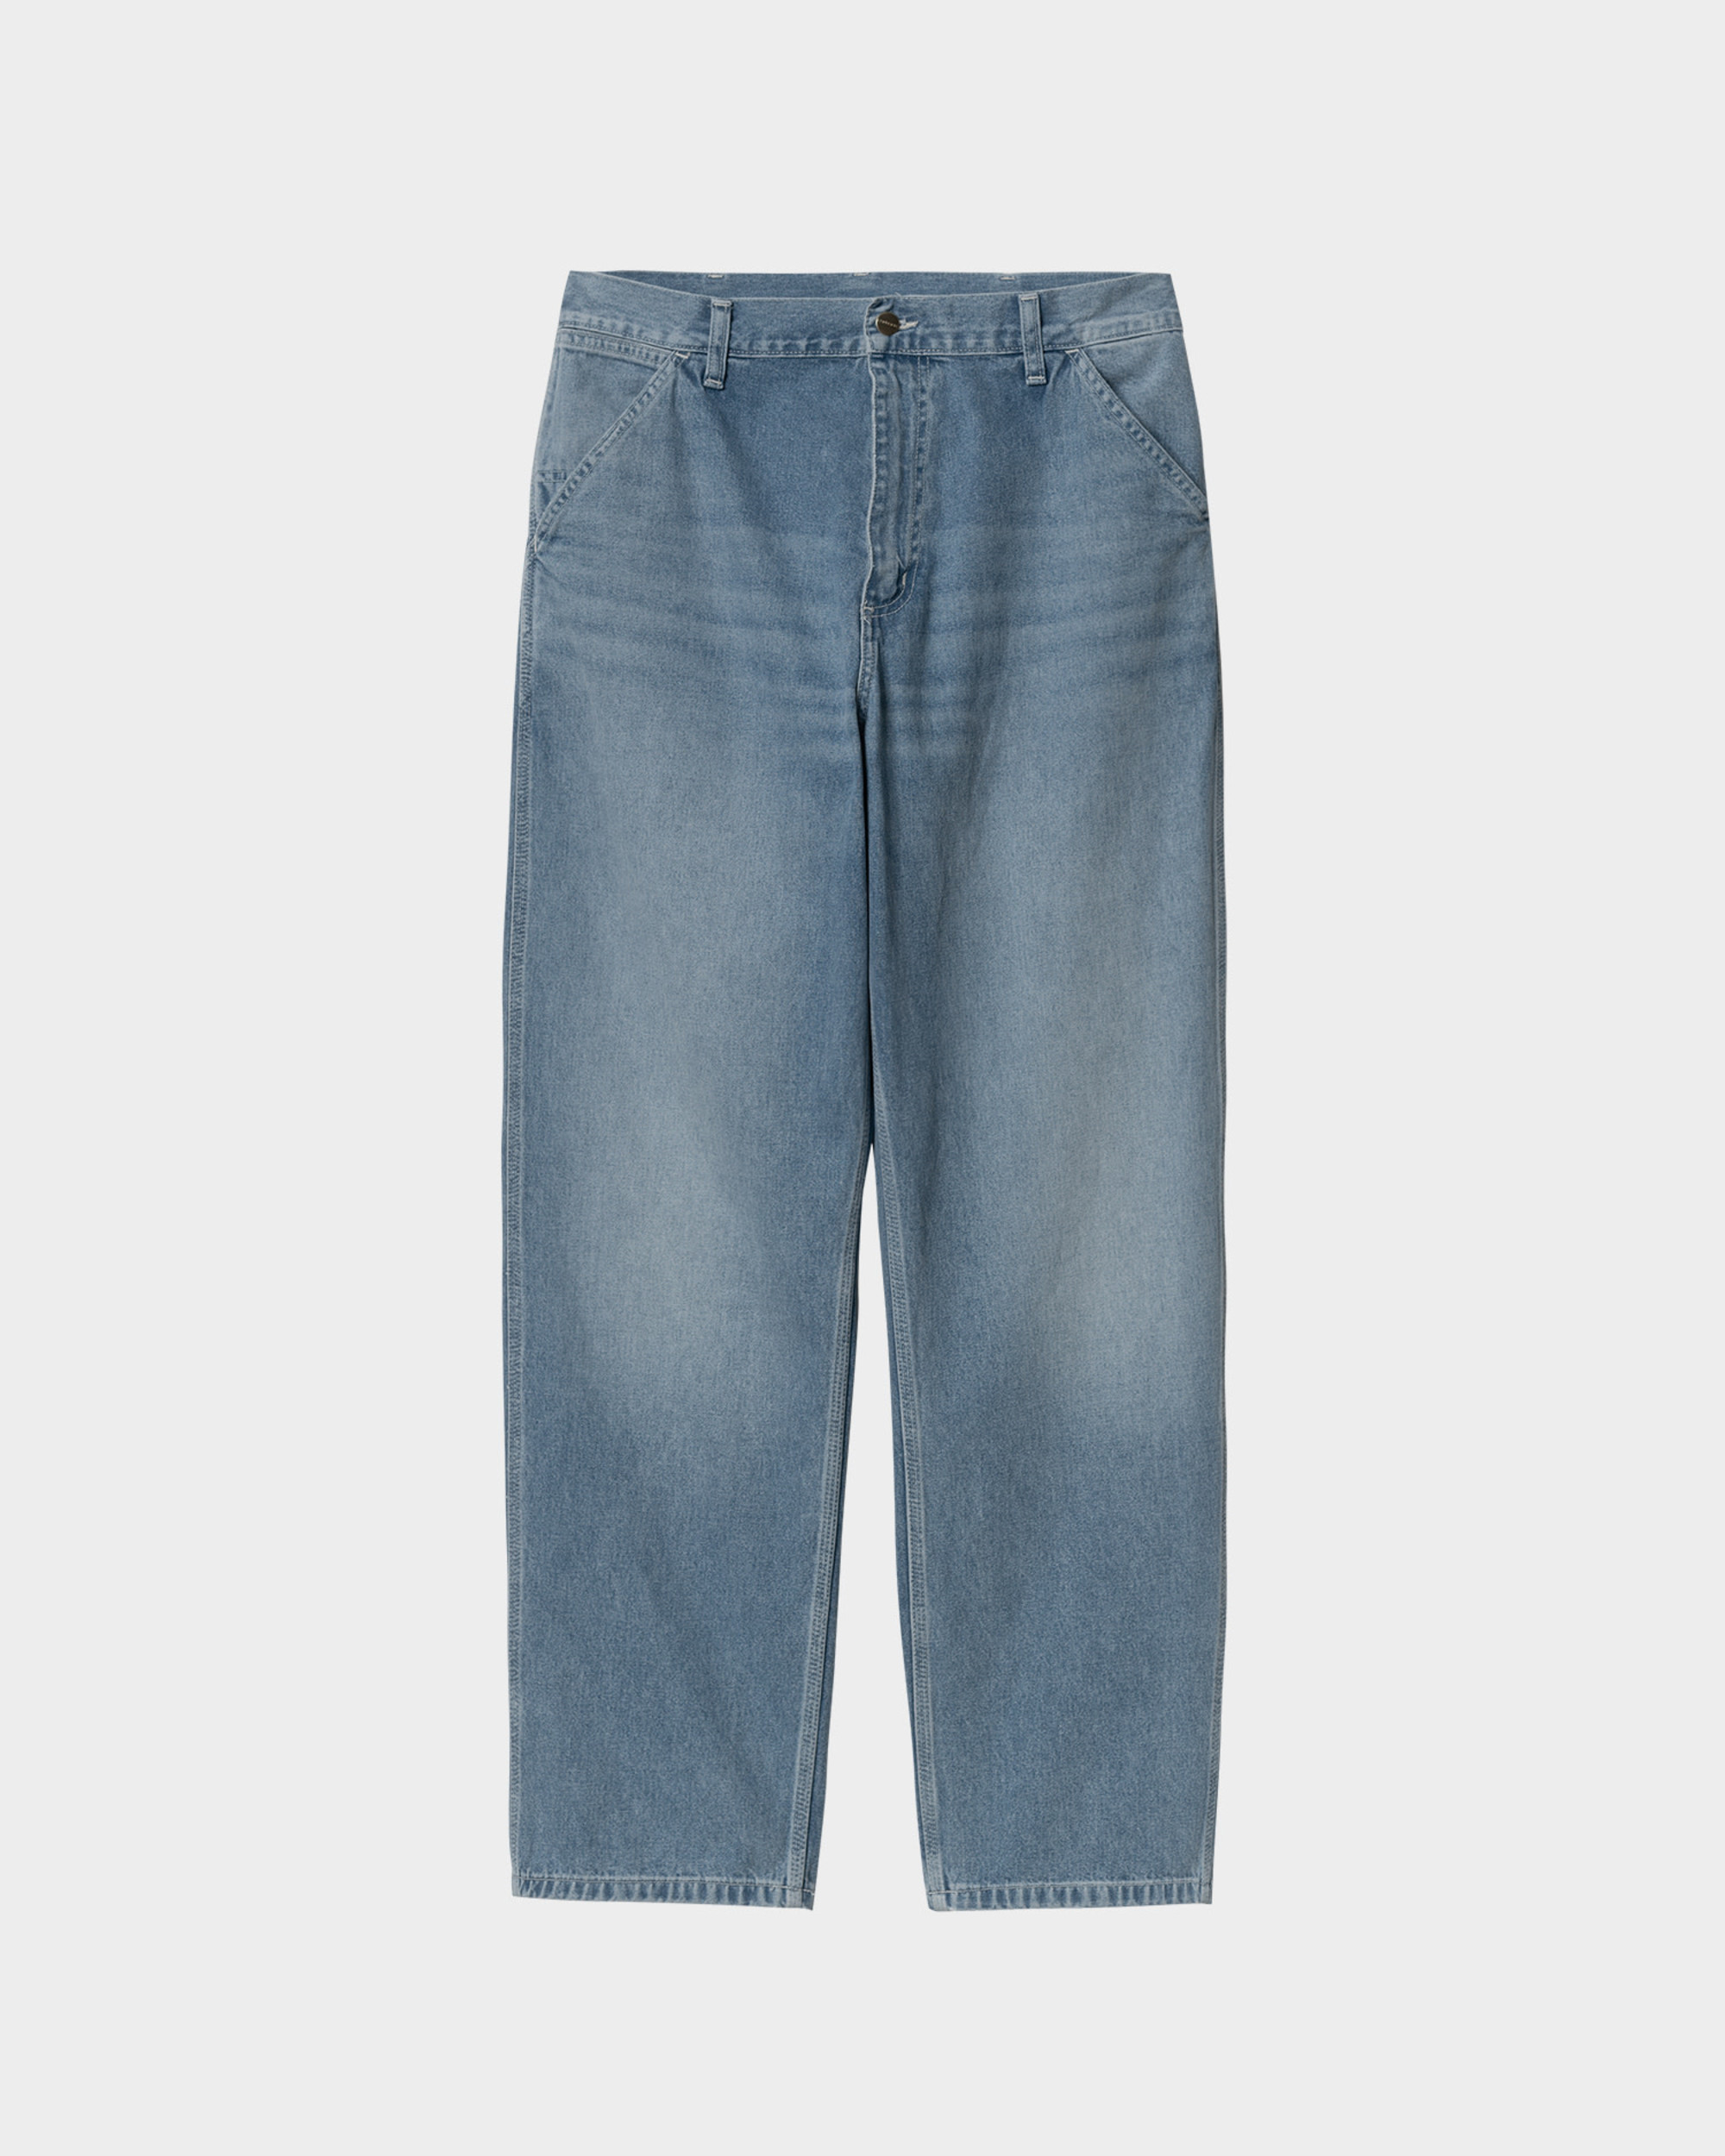 Carhartt Simple Pant Cotton Blue light true washed